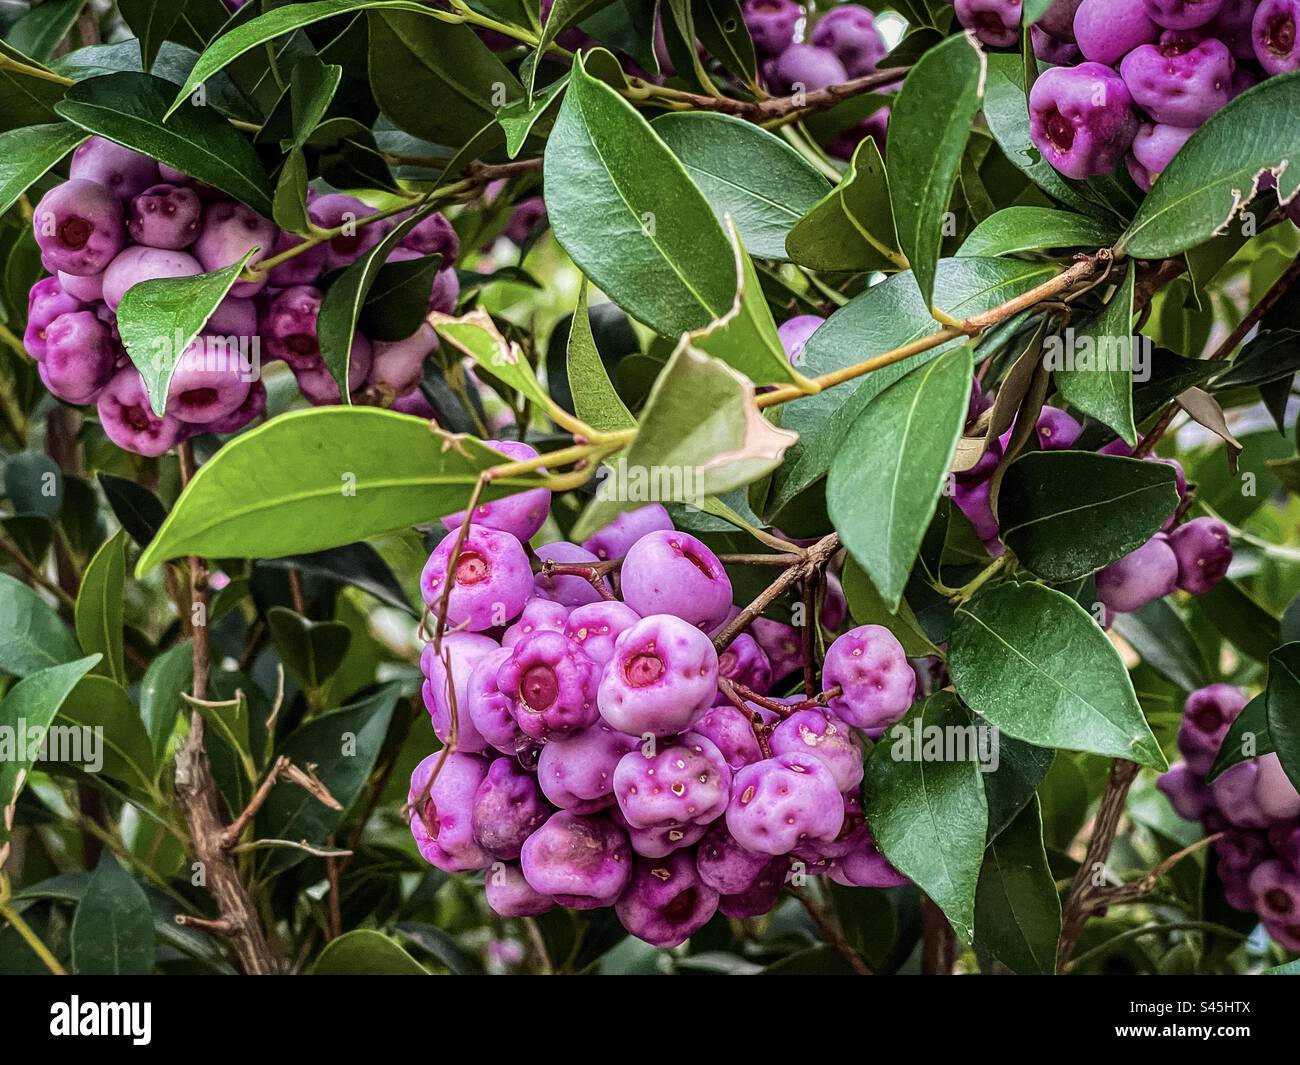 Close- up of edible maroon berries of Syzygium smithii or lilly pilly, a winter-fruiting, native Australian evergreen shrub belonging to Myrtaceae family. Bush tucker, bush food, medicinal berries. Stock Photo